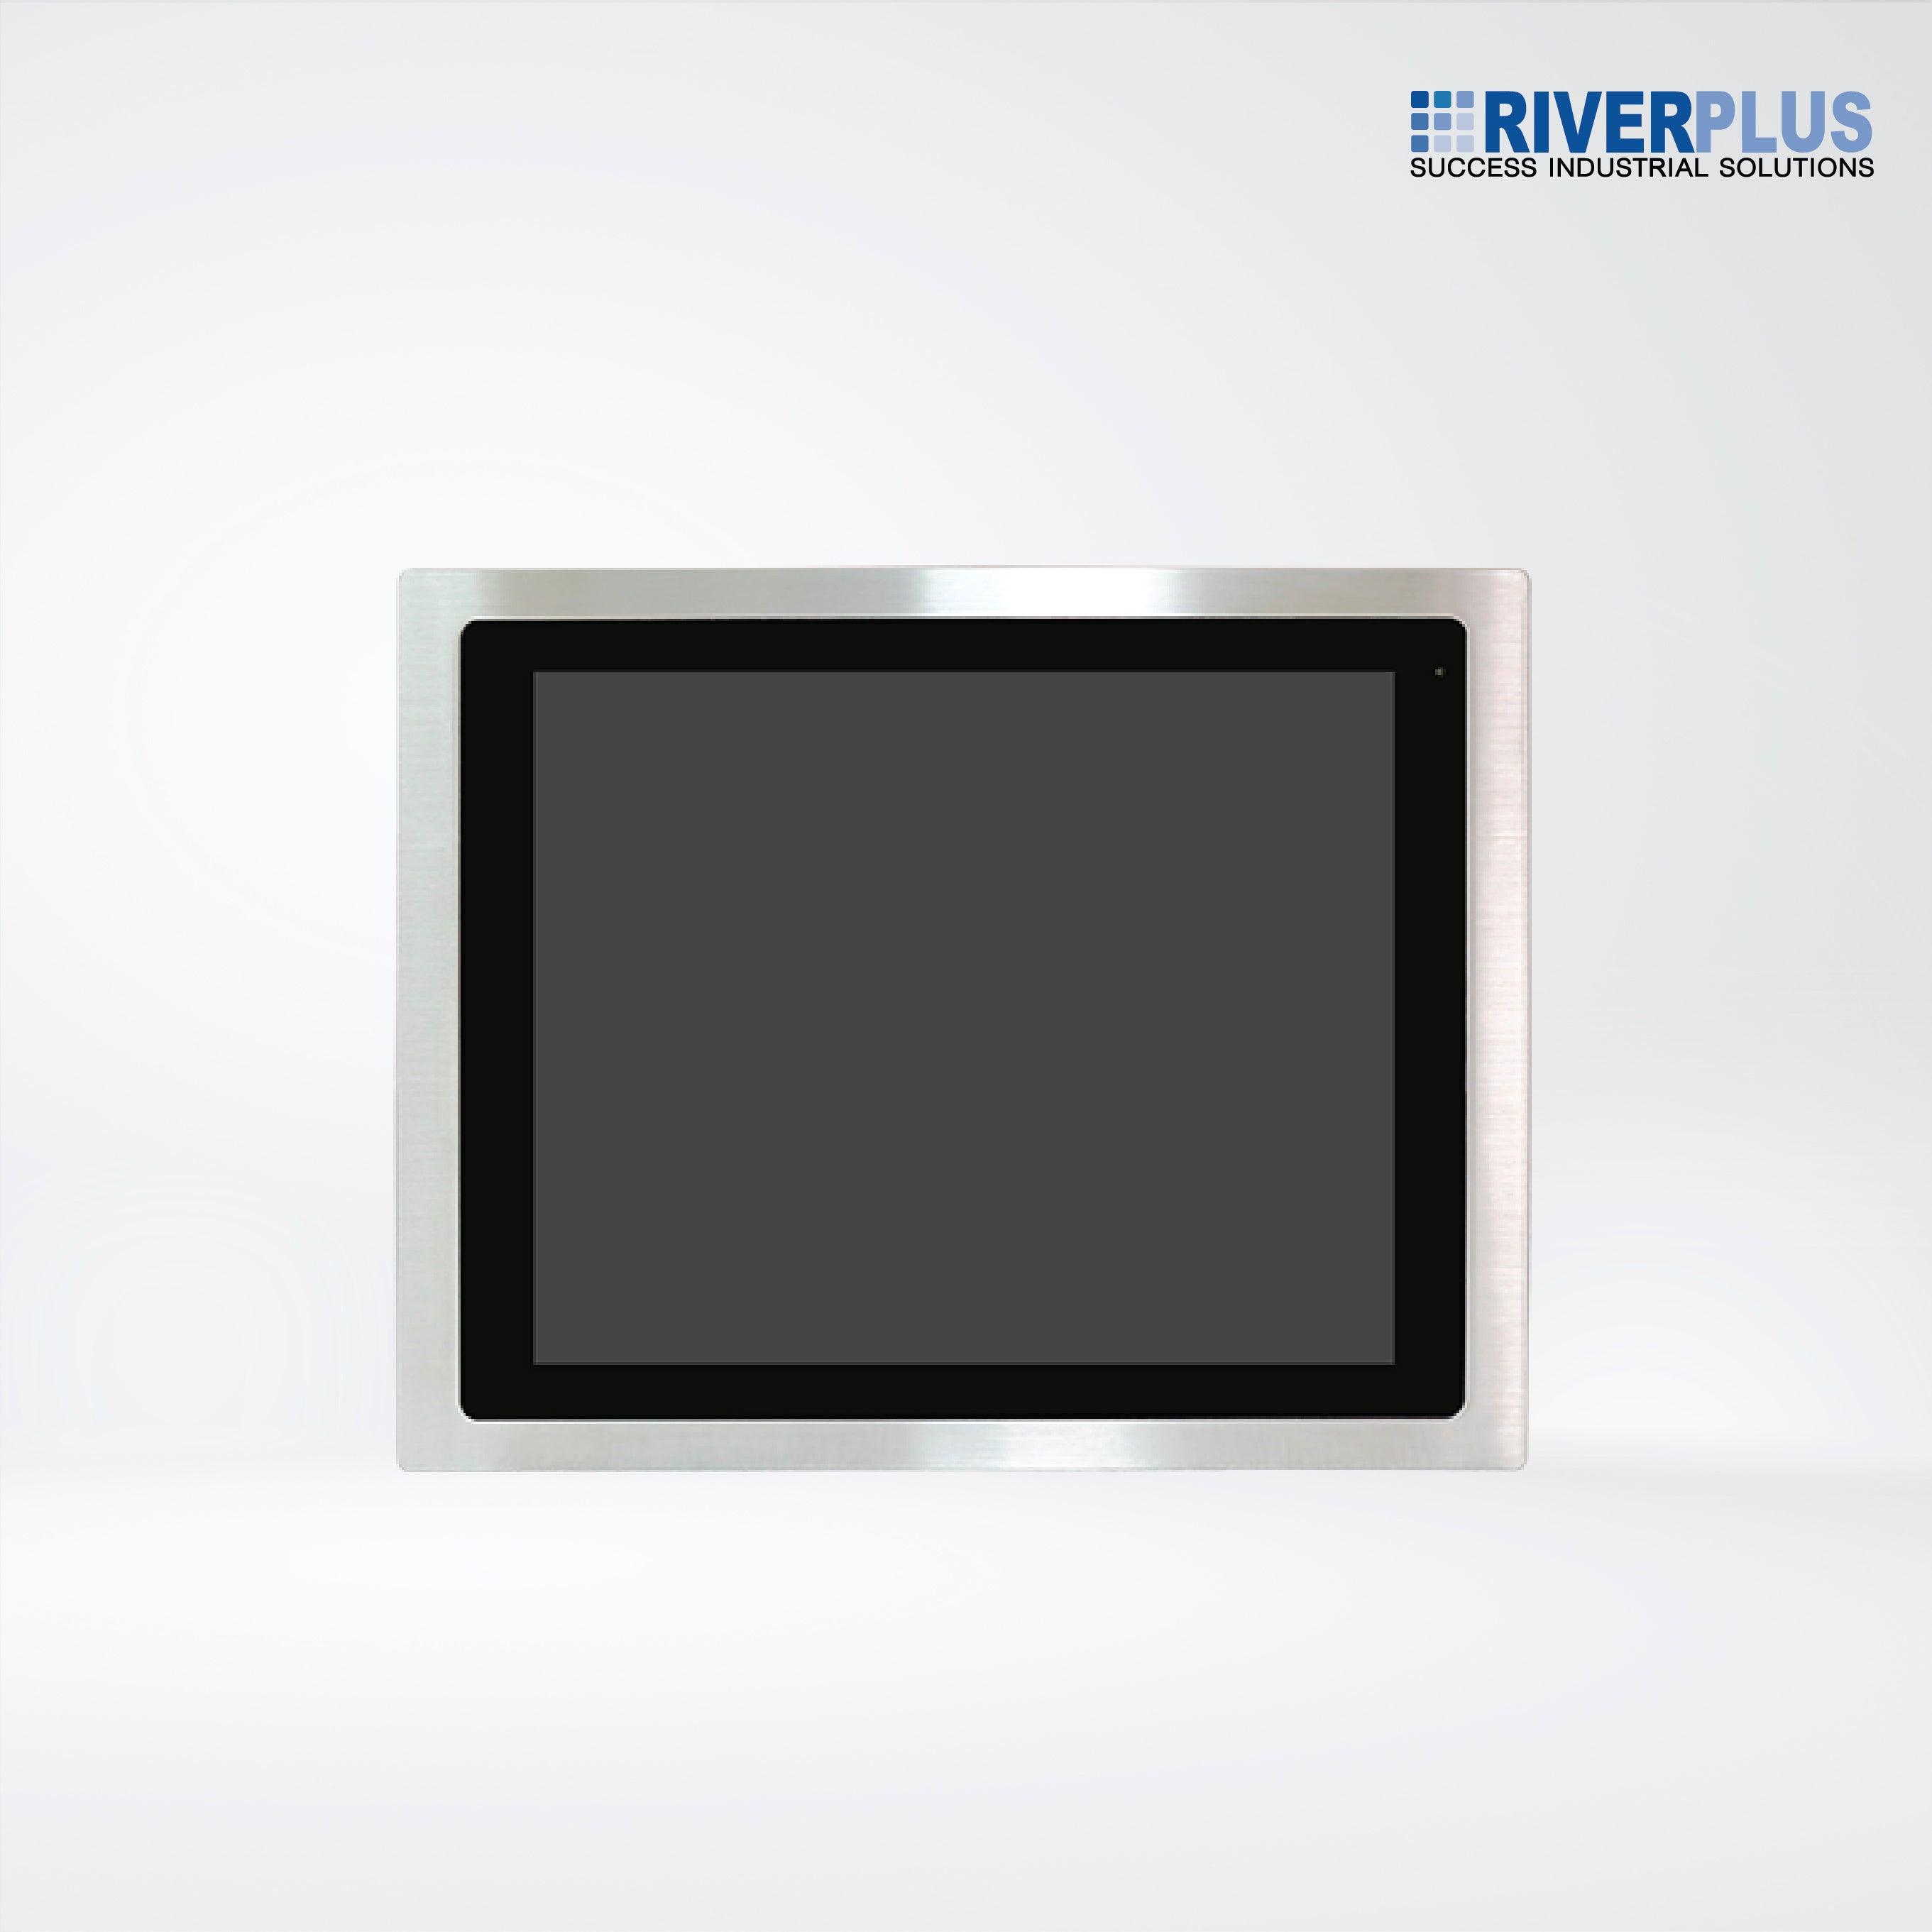 FABS-117PH 17” Flat Front Panel IP66 Stainless Chassis Display - Riverplus